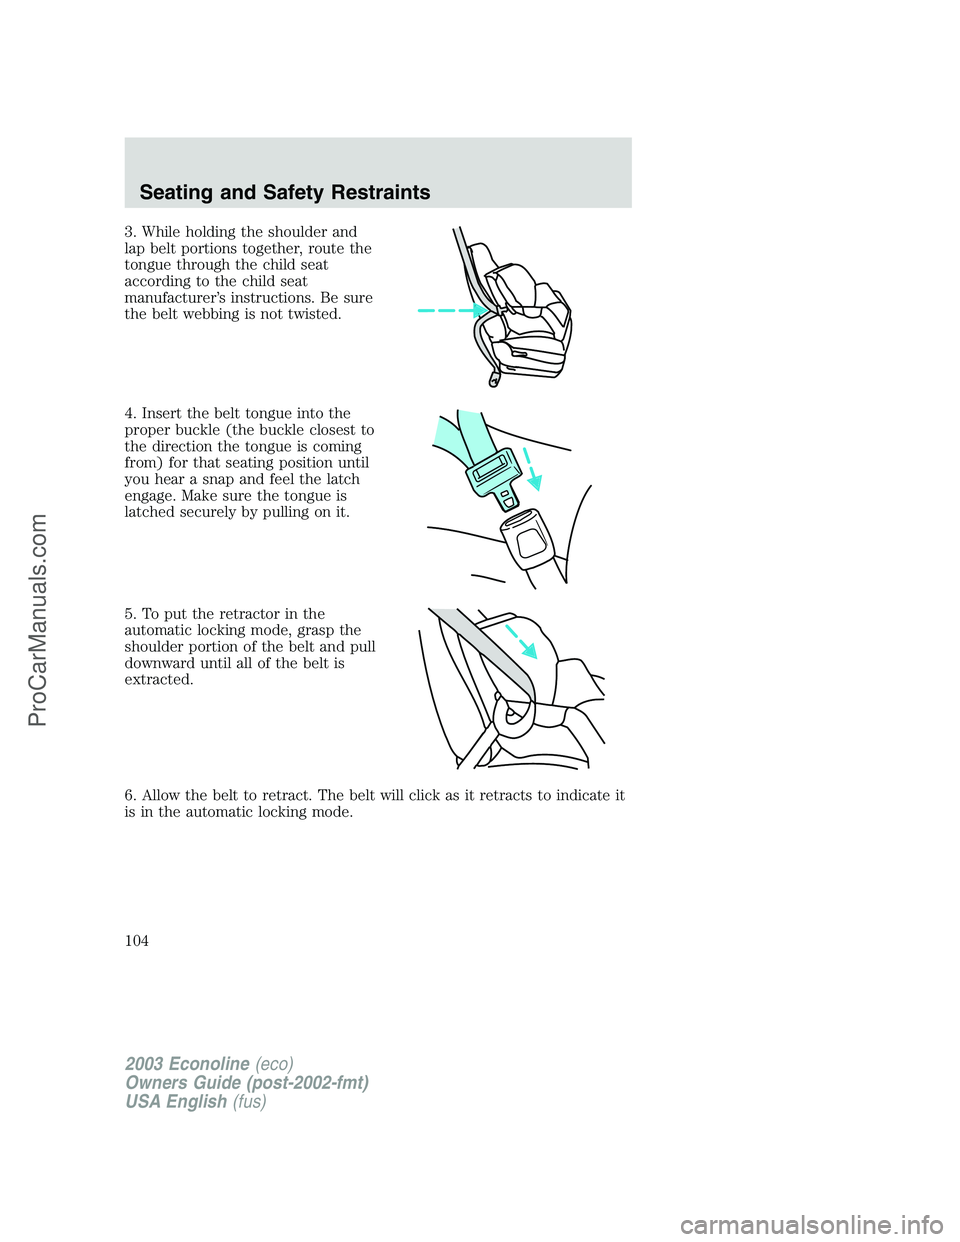 FORD E-150 2003  Owners Manual 3. While holding the shoulder and
lap belt portions together, route the
tongue through the child seat
according to the child seat
manufacturer’s instructions. Be sure
the belt webbing is not twisted